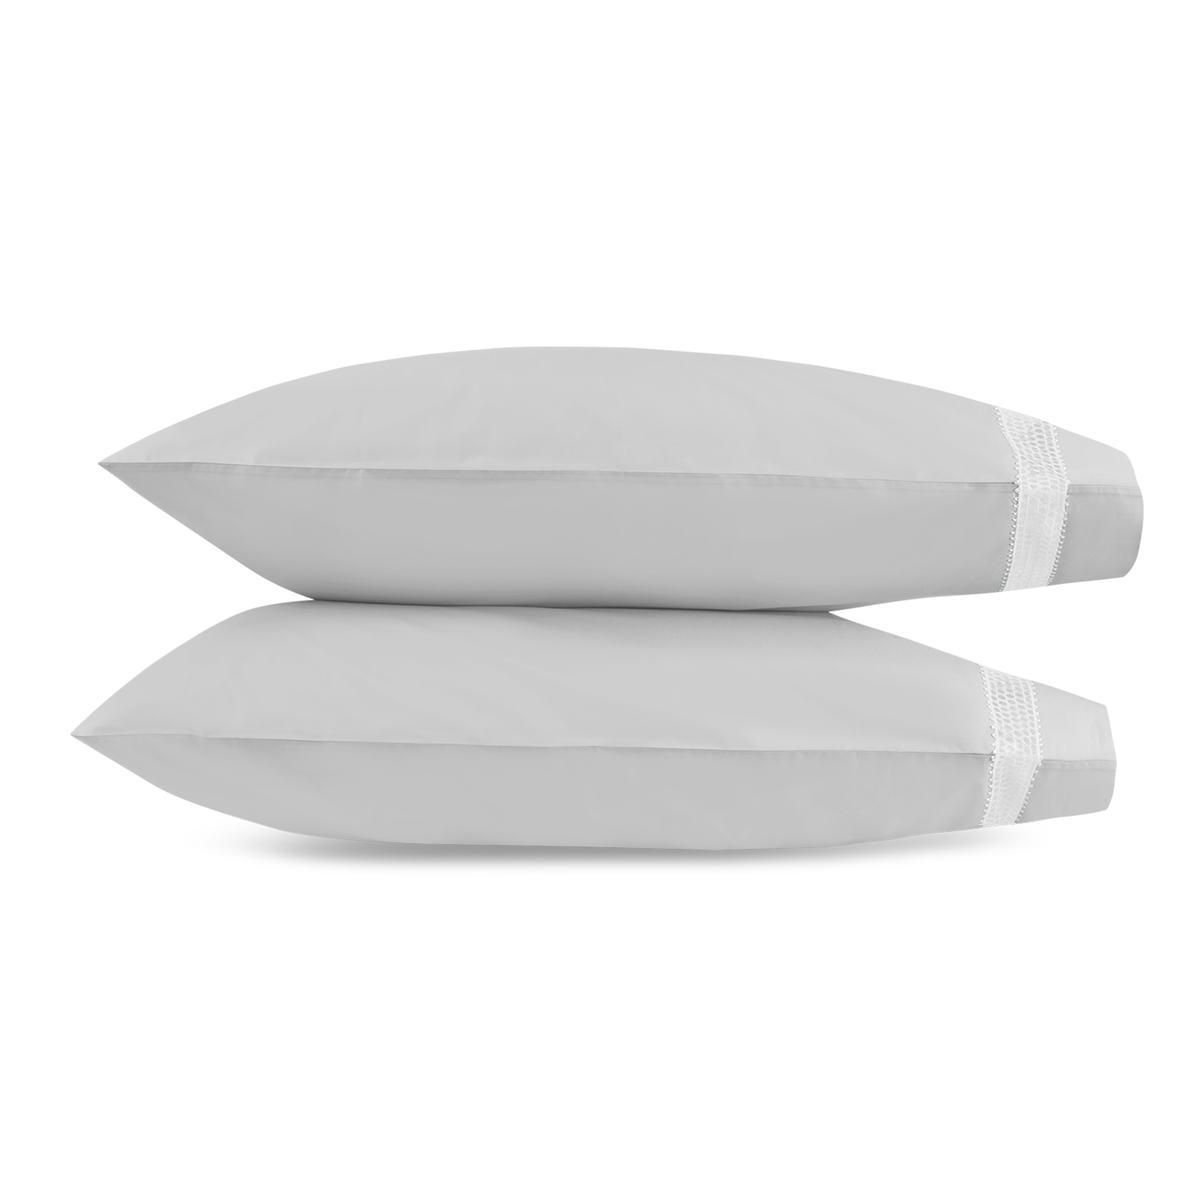 Clear Image of Matouk Cecily Pillowcases in Silver Color